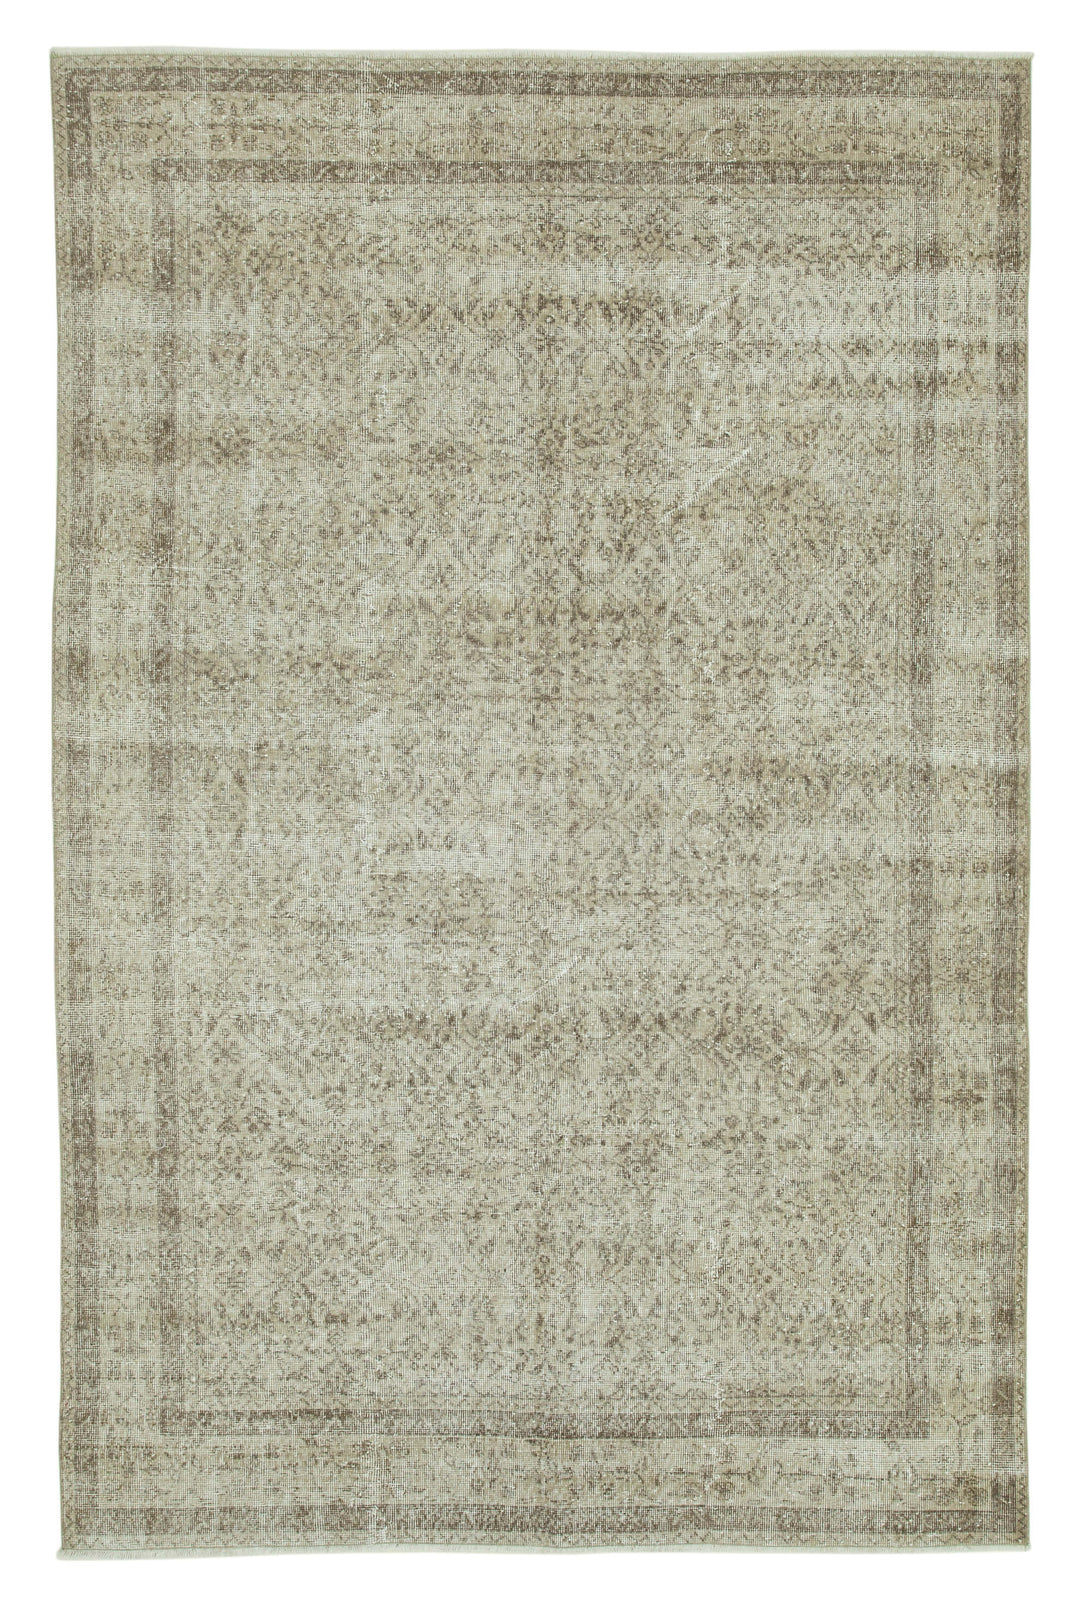 Handmade White Wash Area Rug > Design# OL-AC-36590 > Size: 6'-5" x 9'-11", Carpet Culture Rugs, Handmade Rugs, NYC Rugs, New Rugs, Shop Rugs, Rug Store, Outlet Rugs, SoHo Rugs, Rugs in USA